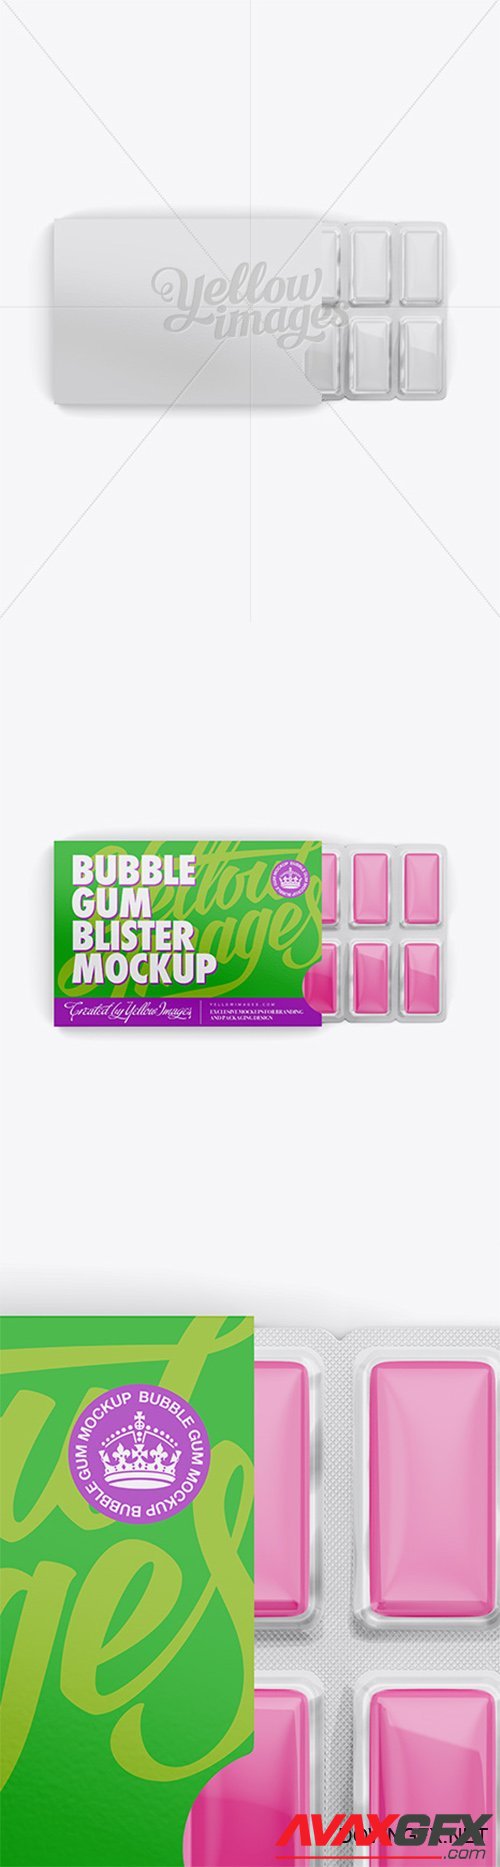 Chewing Gum in Blister Package Mockup - Top 13297